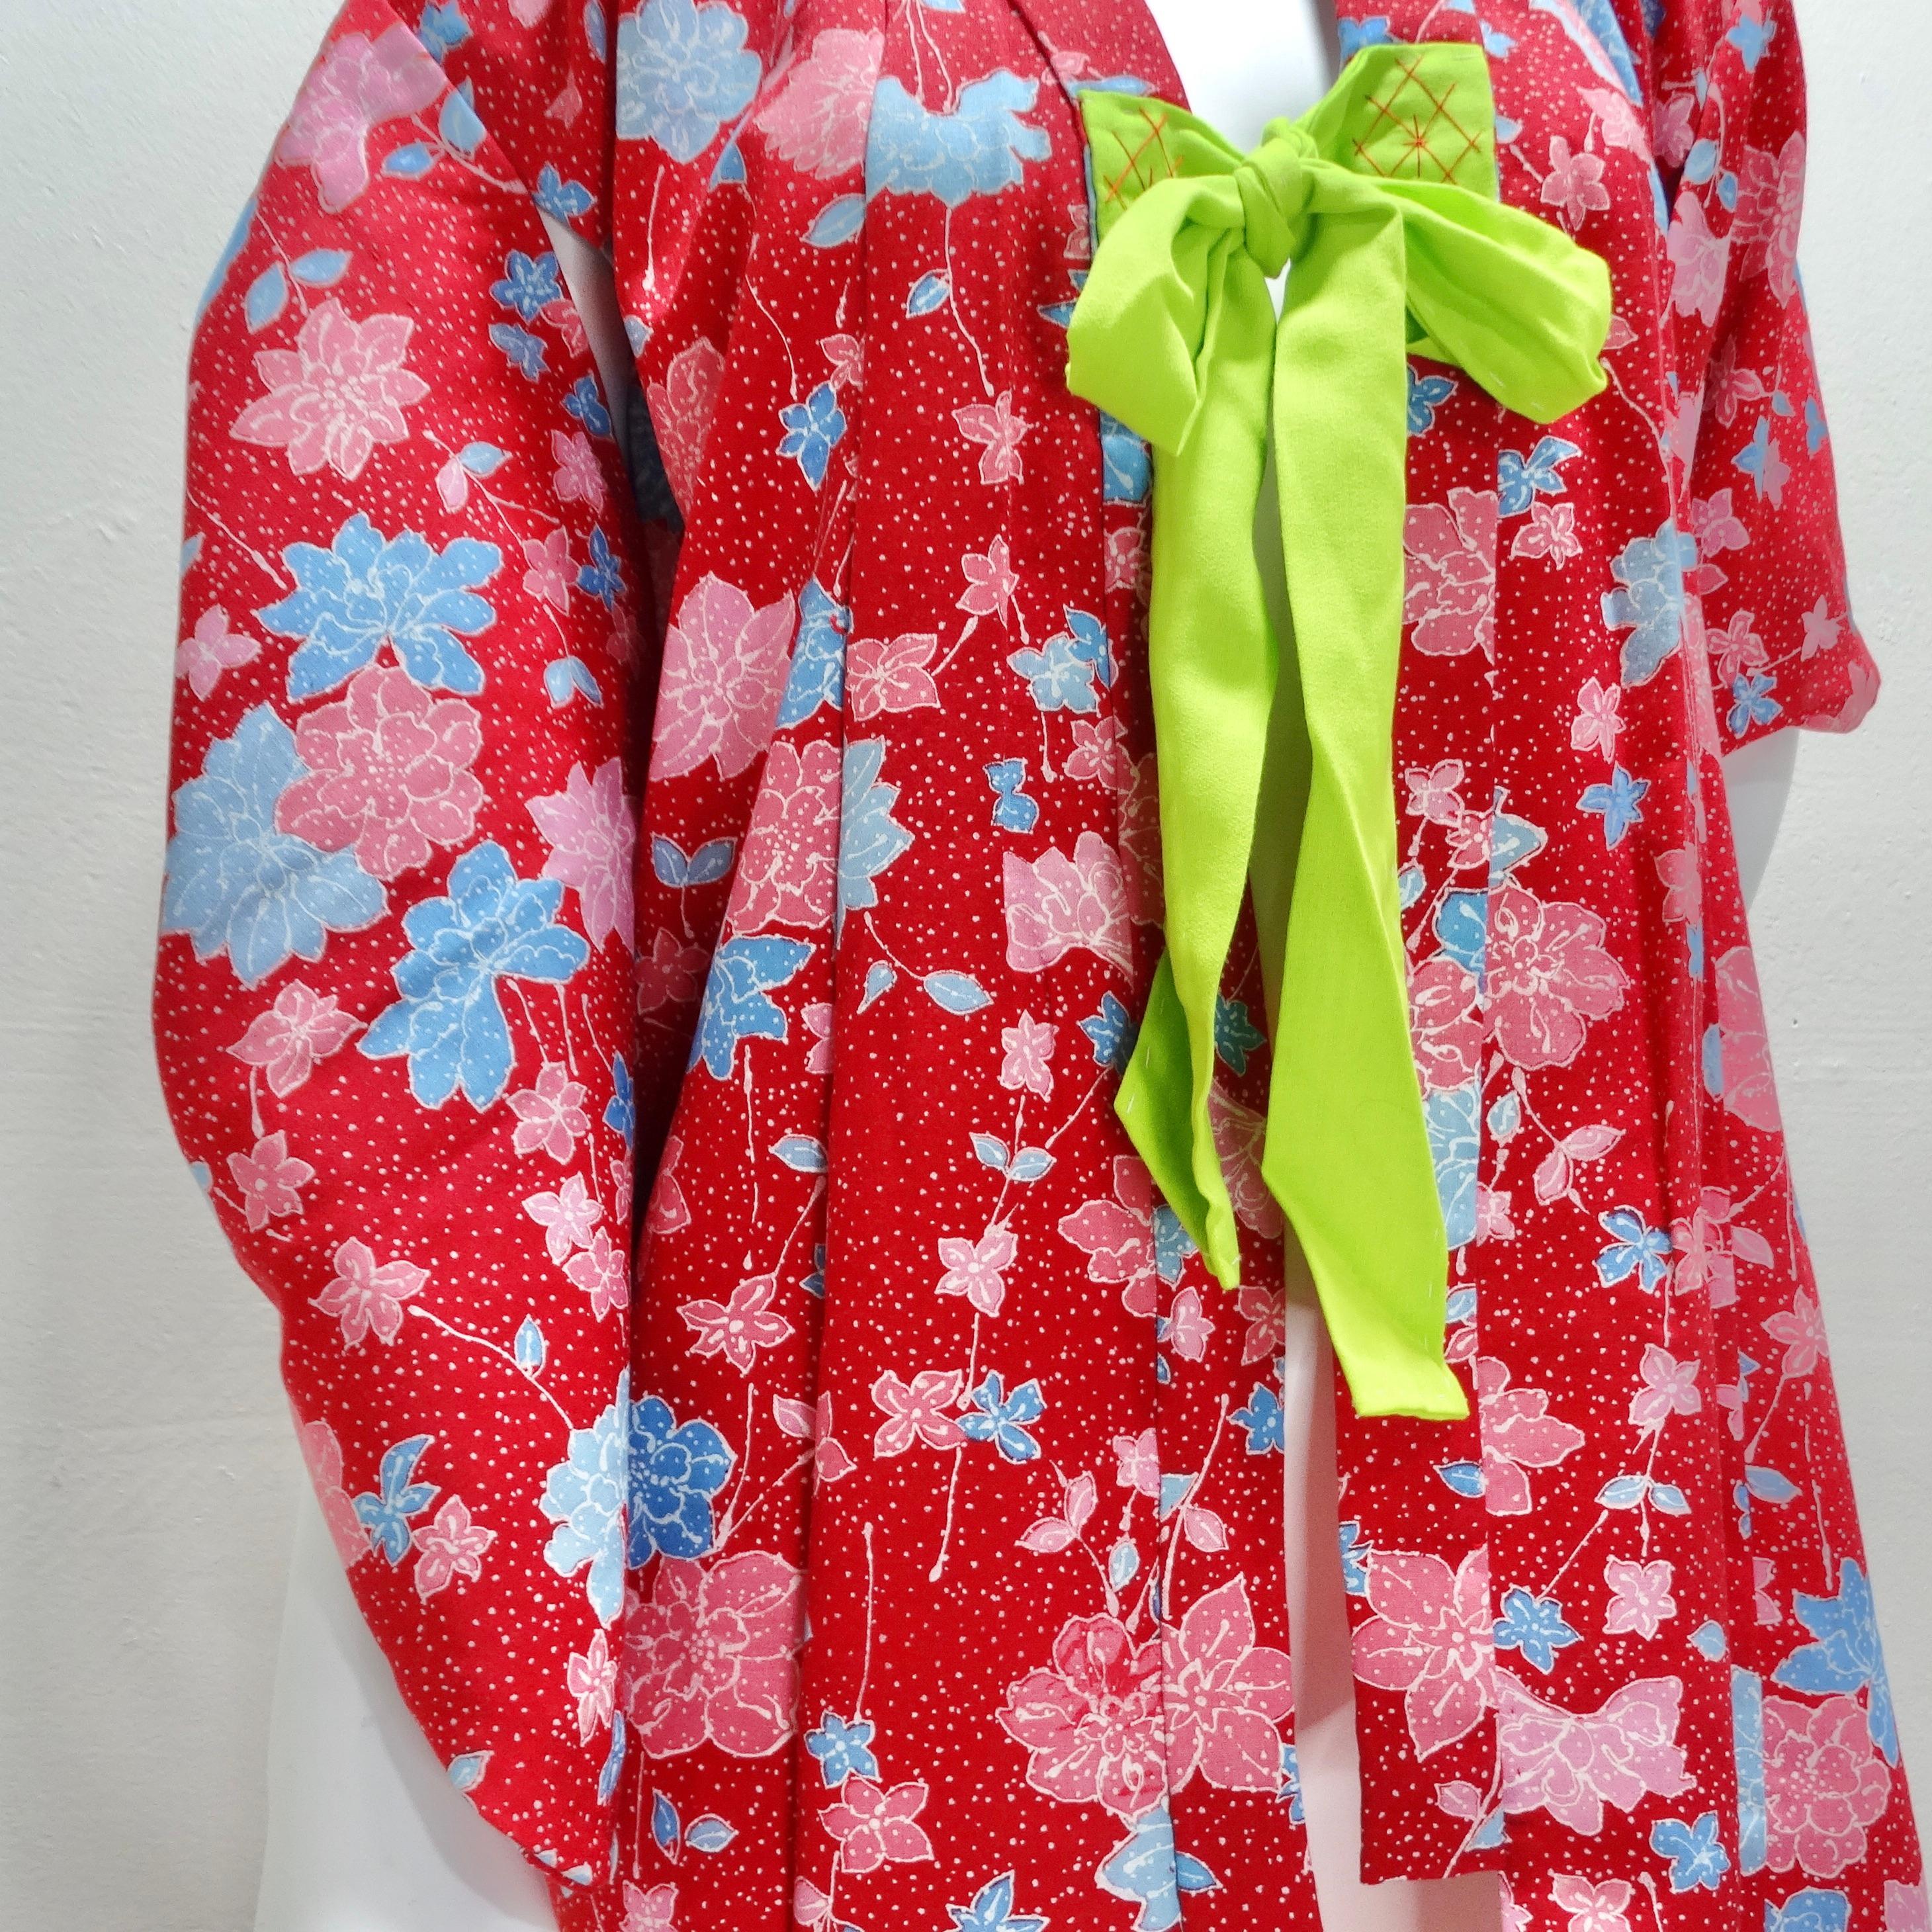 1970s Handmade Japanese Red Cotton Kimono In Excellent Condition For Sale In Scottsdale, AZ